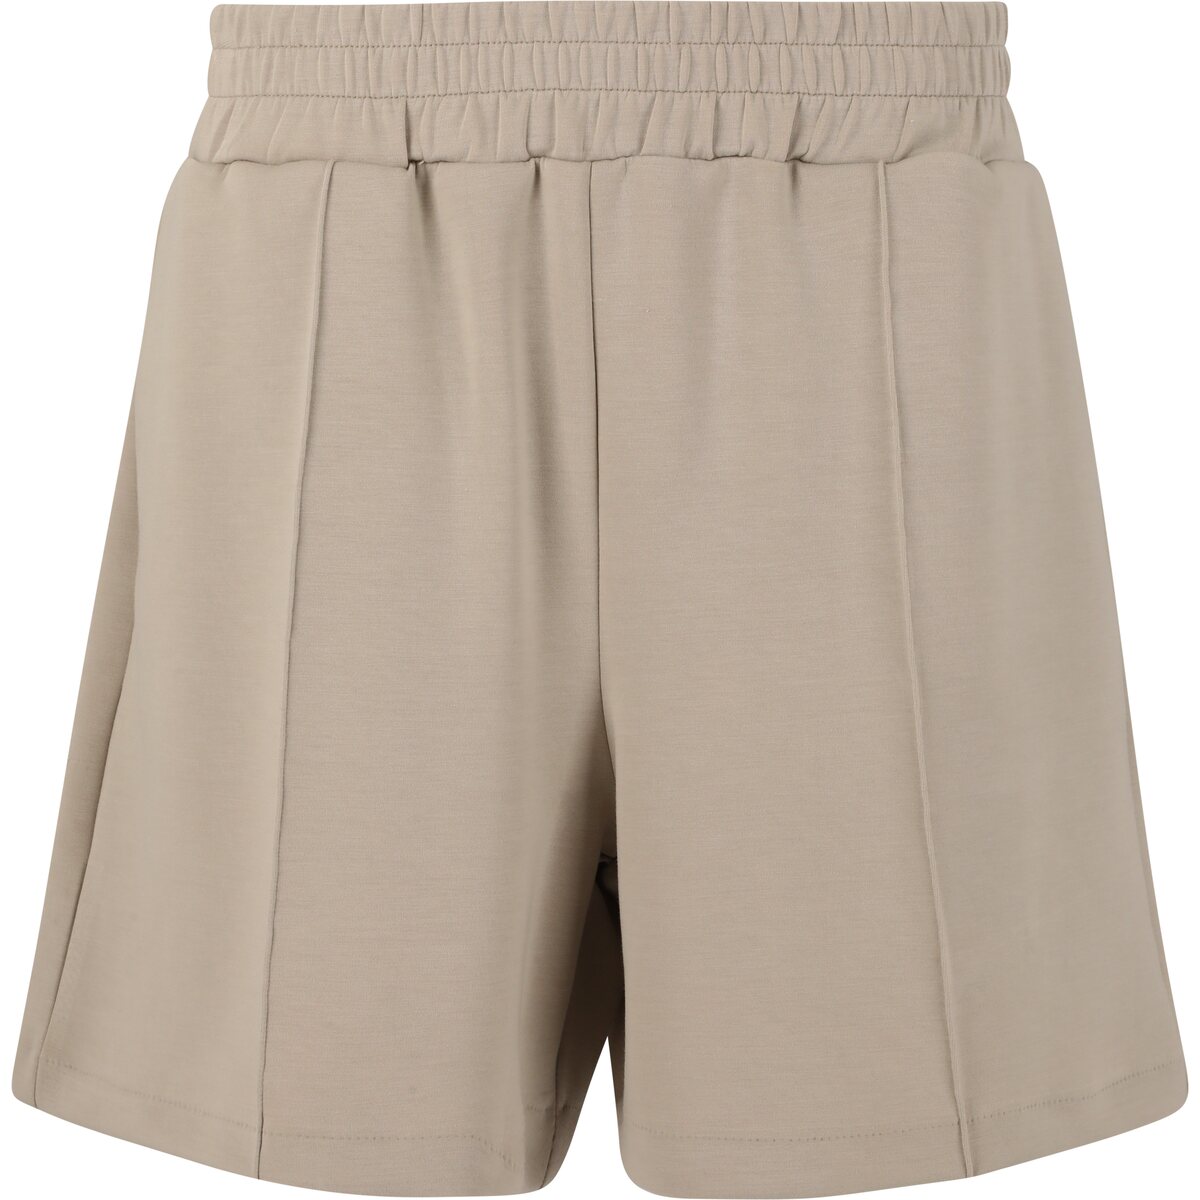 Athlecia Jacey Womenswear High Waisted Lounge Shorts 6 Shaws Department Stores